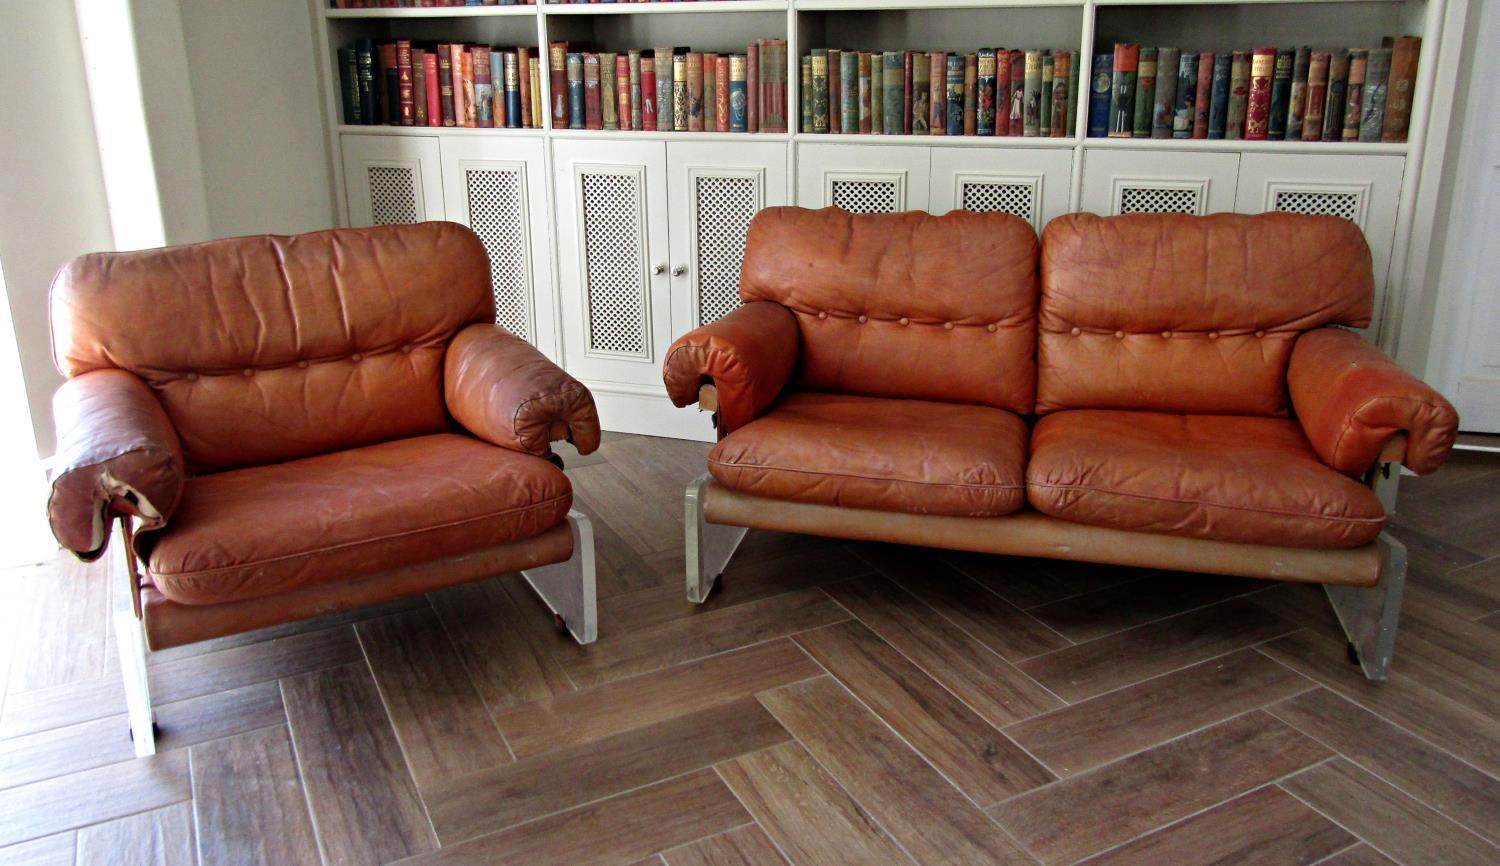 Unusual Italian 1960s tan leather sofa, with button back upholstery upon thick lucite/perspex